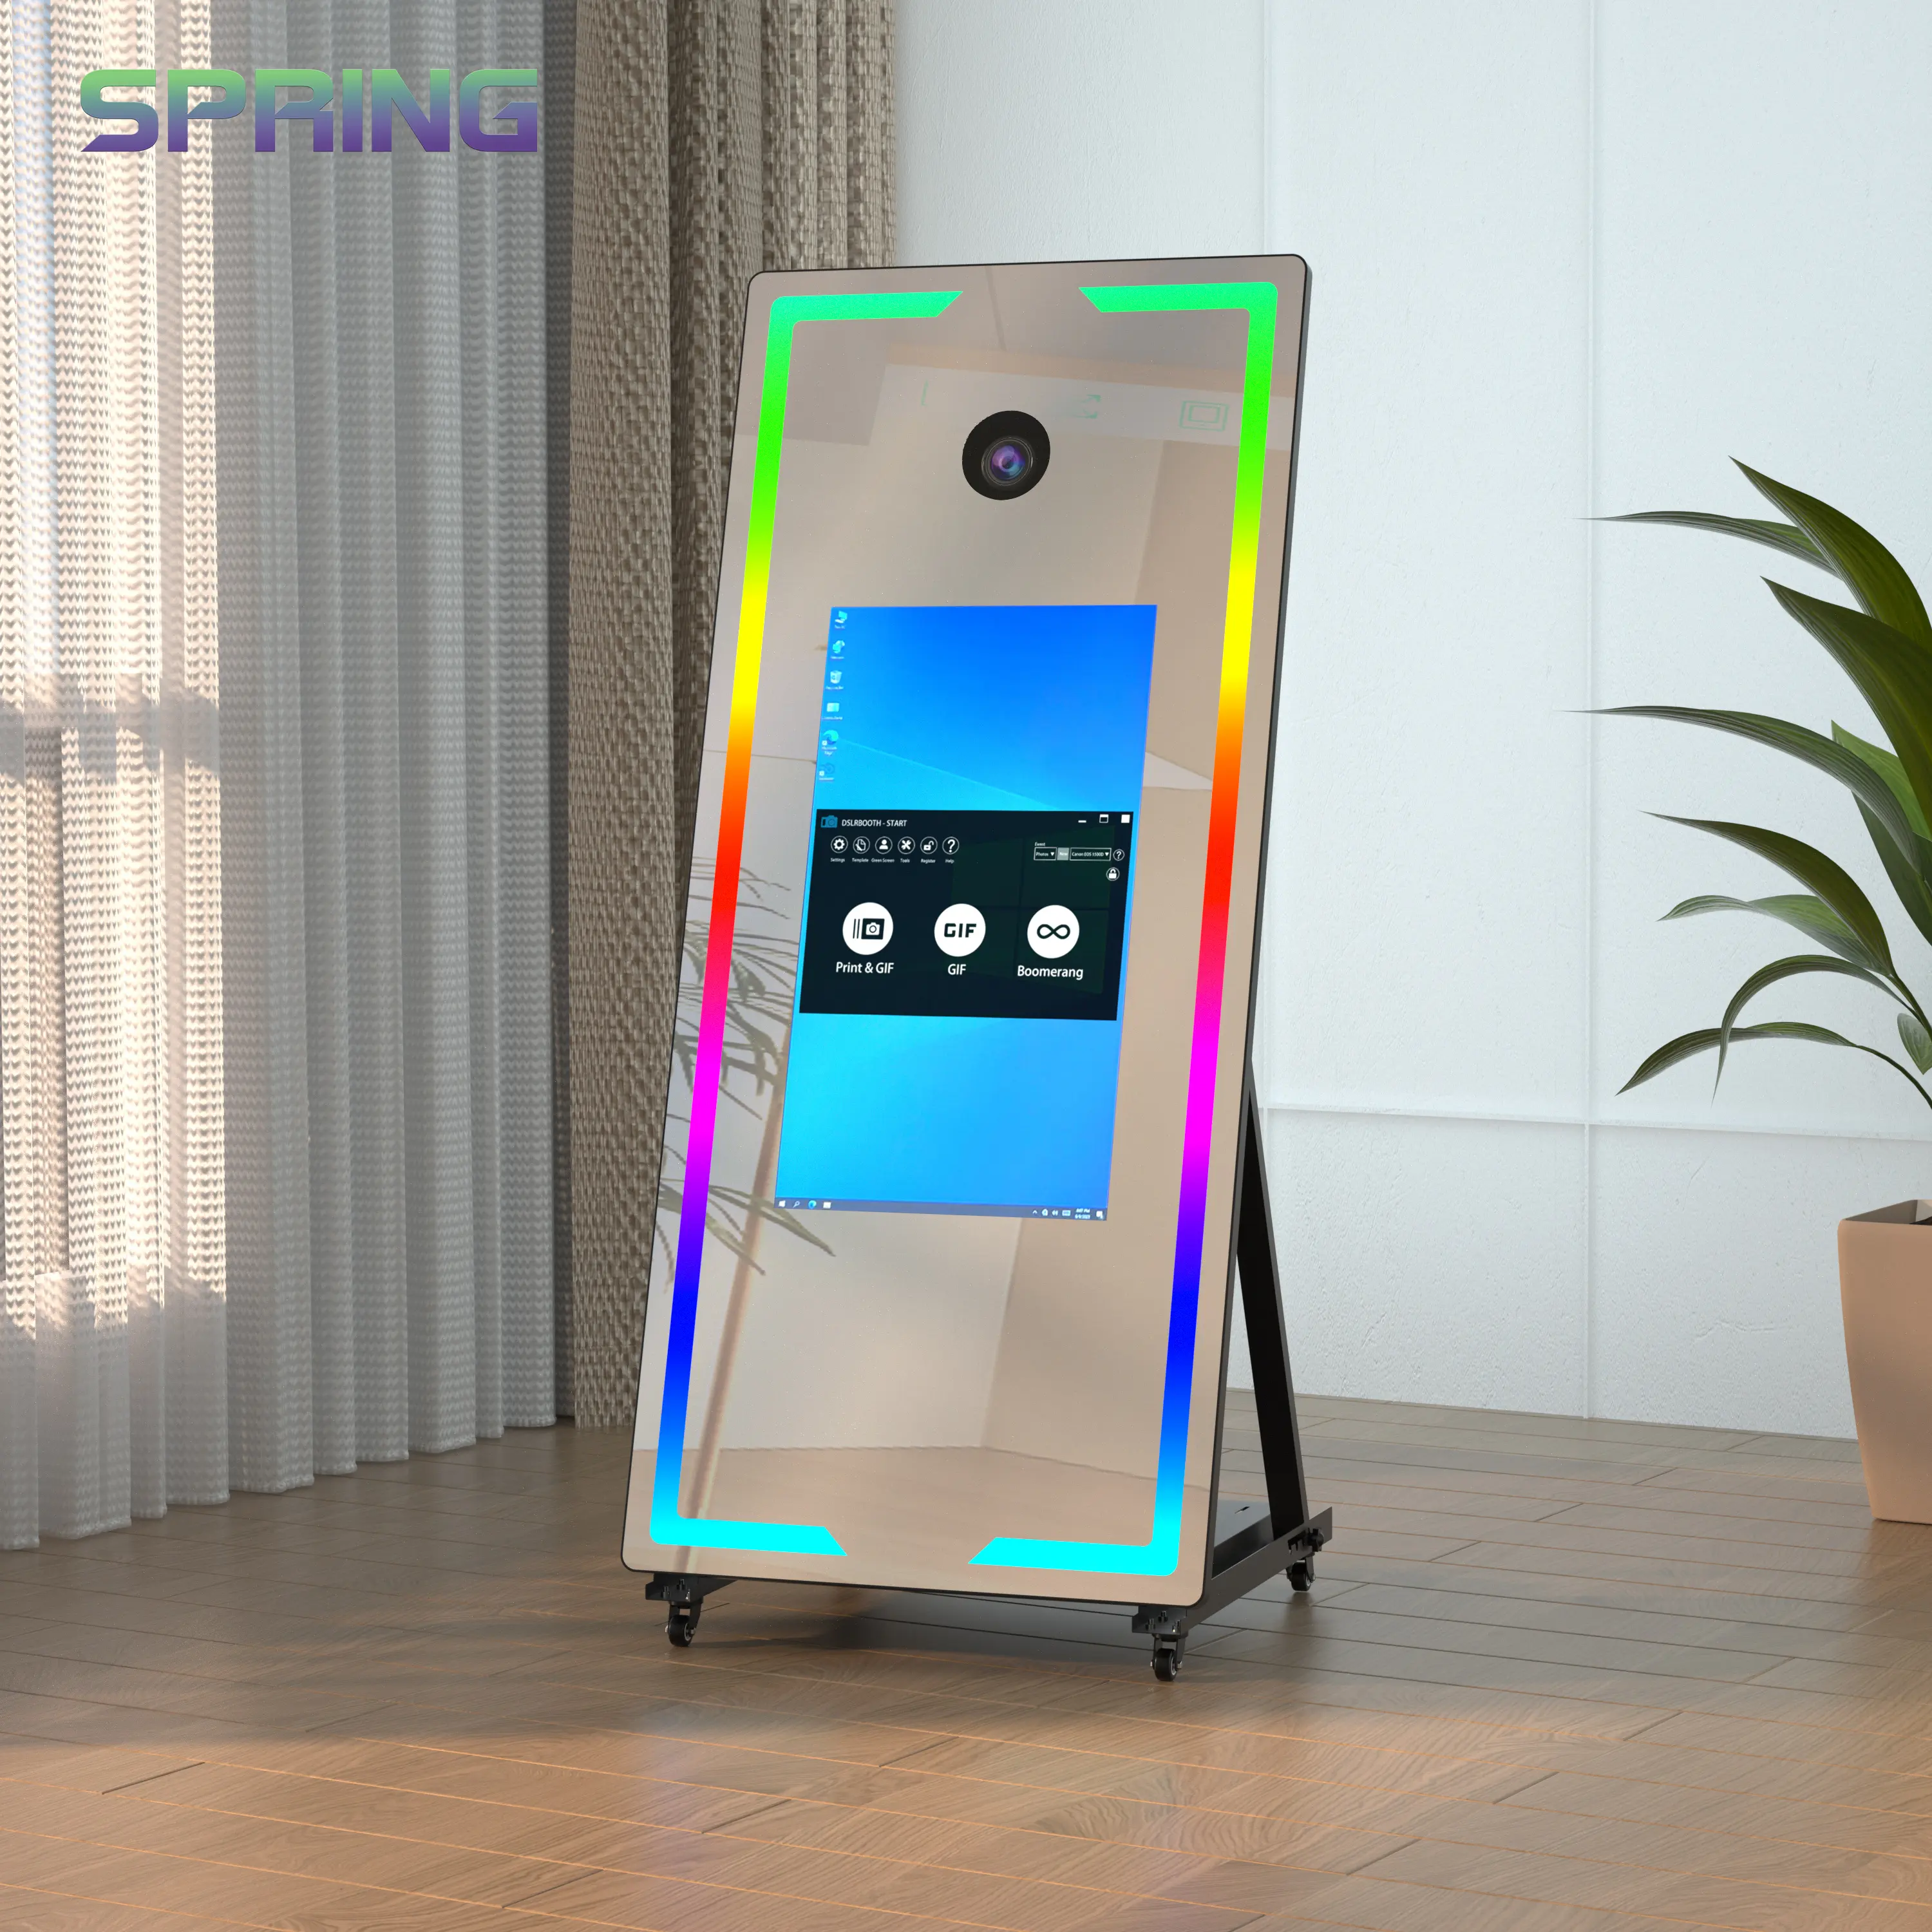 Portable digital 45/65 inch magic interactive selfie video photo mirror glass booth touch screen with camera and printer